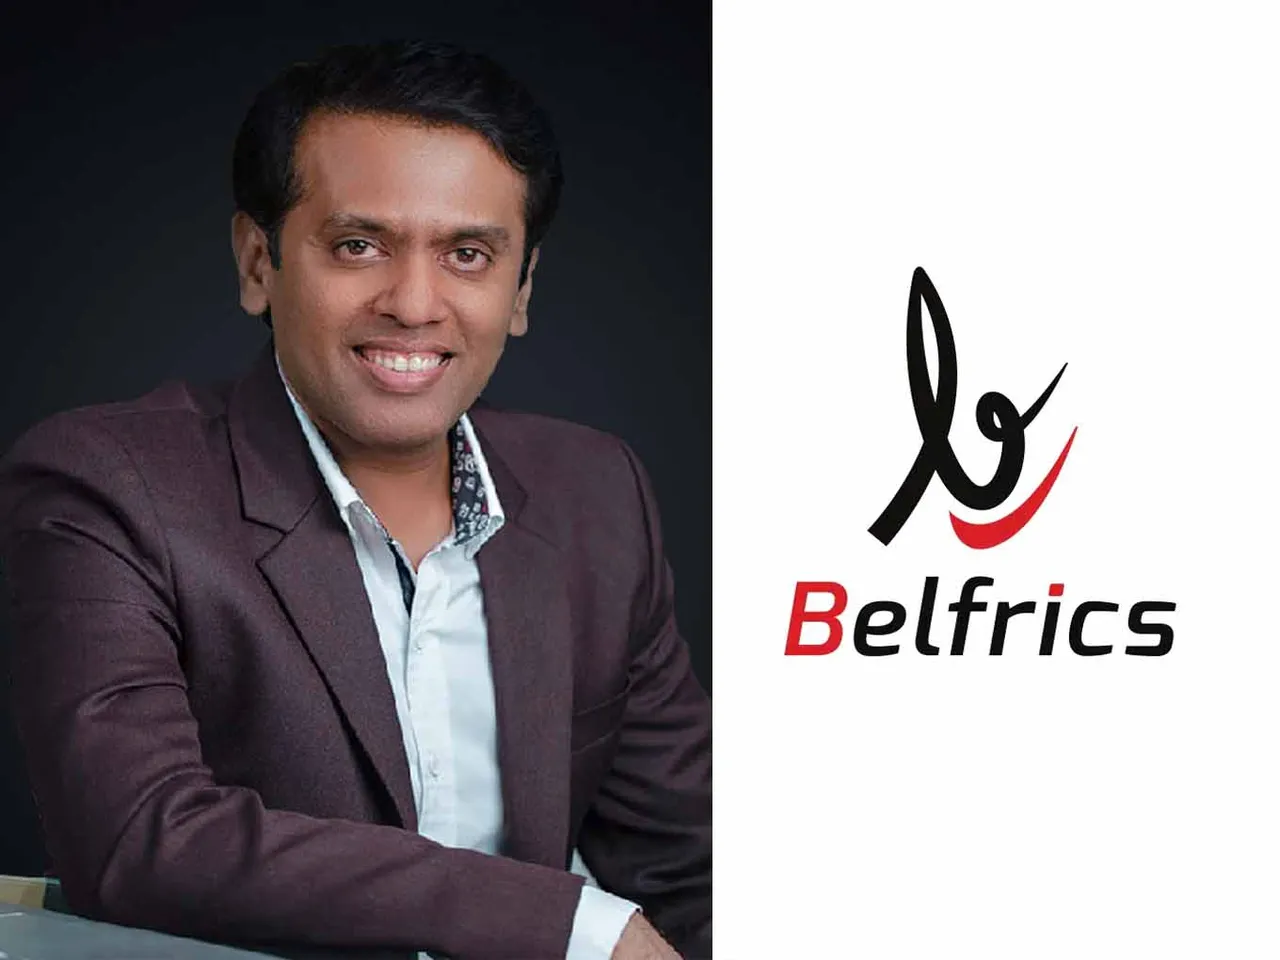 Global blockchain firm Belfrics to launch its India operations with $15M investment